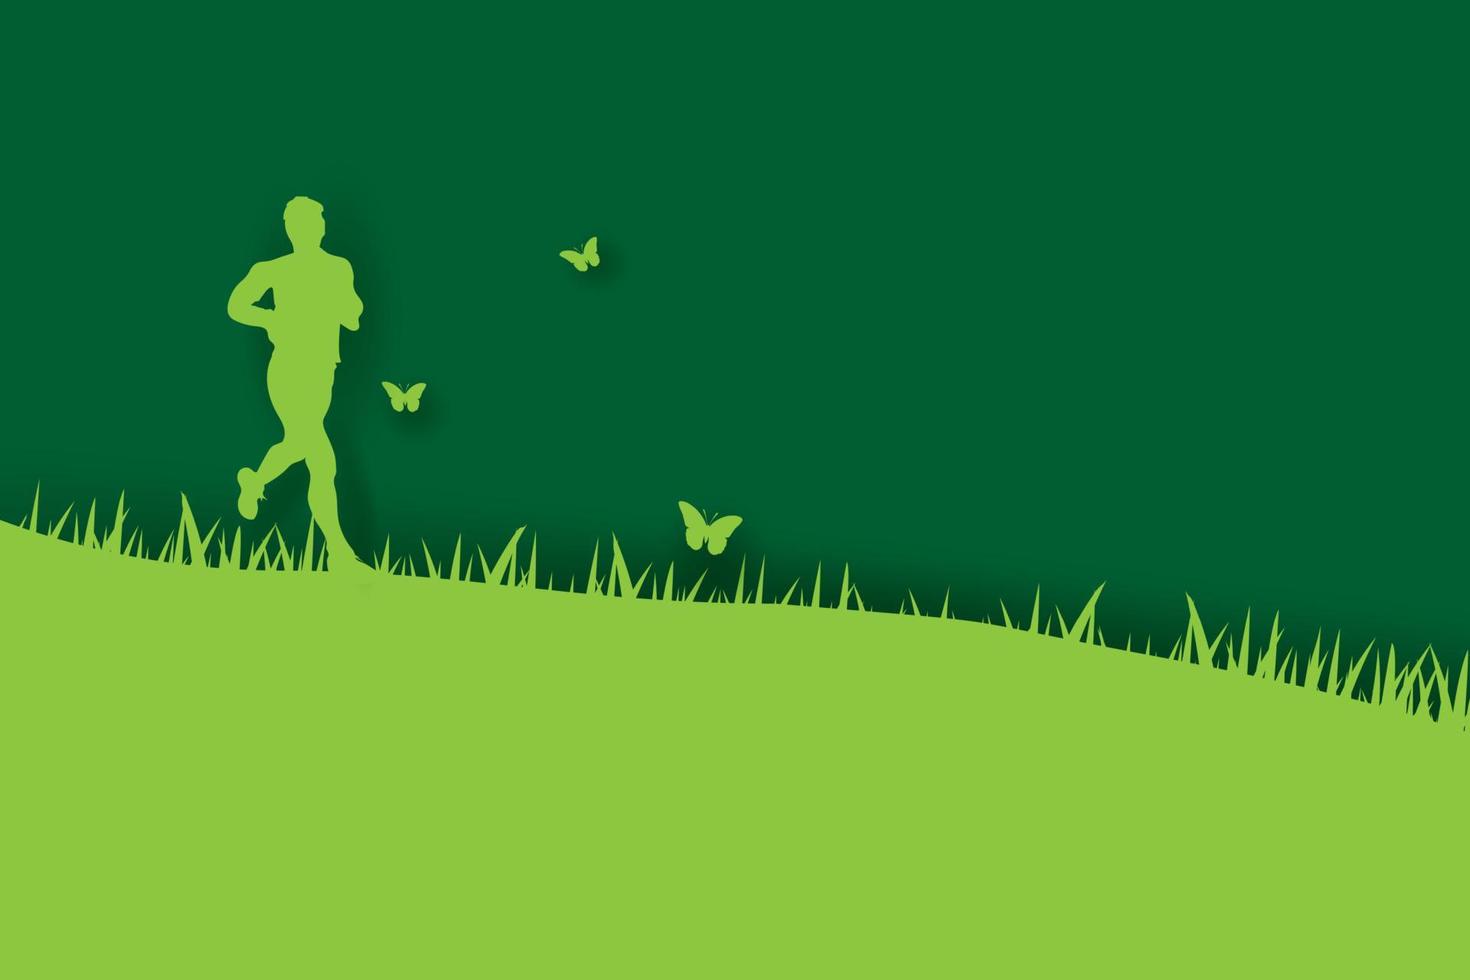 3d paper art and craft of Young runners jogging in park on green background with green grass.Man happy relax outdoors park garden have Nature butterflies flying around.Take care of your health.vector vector